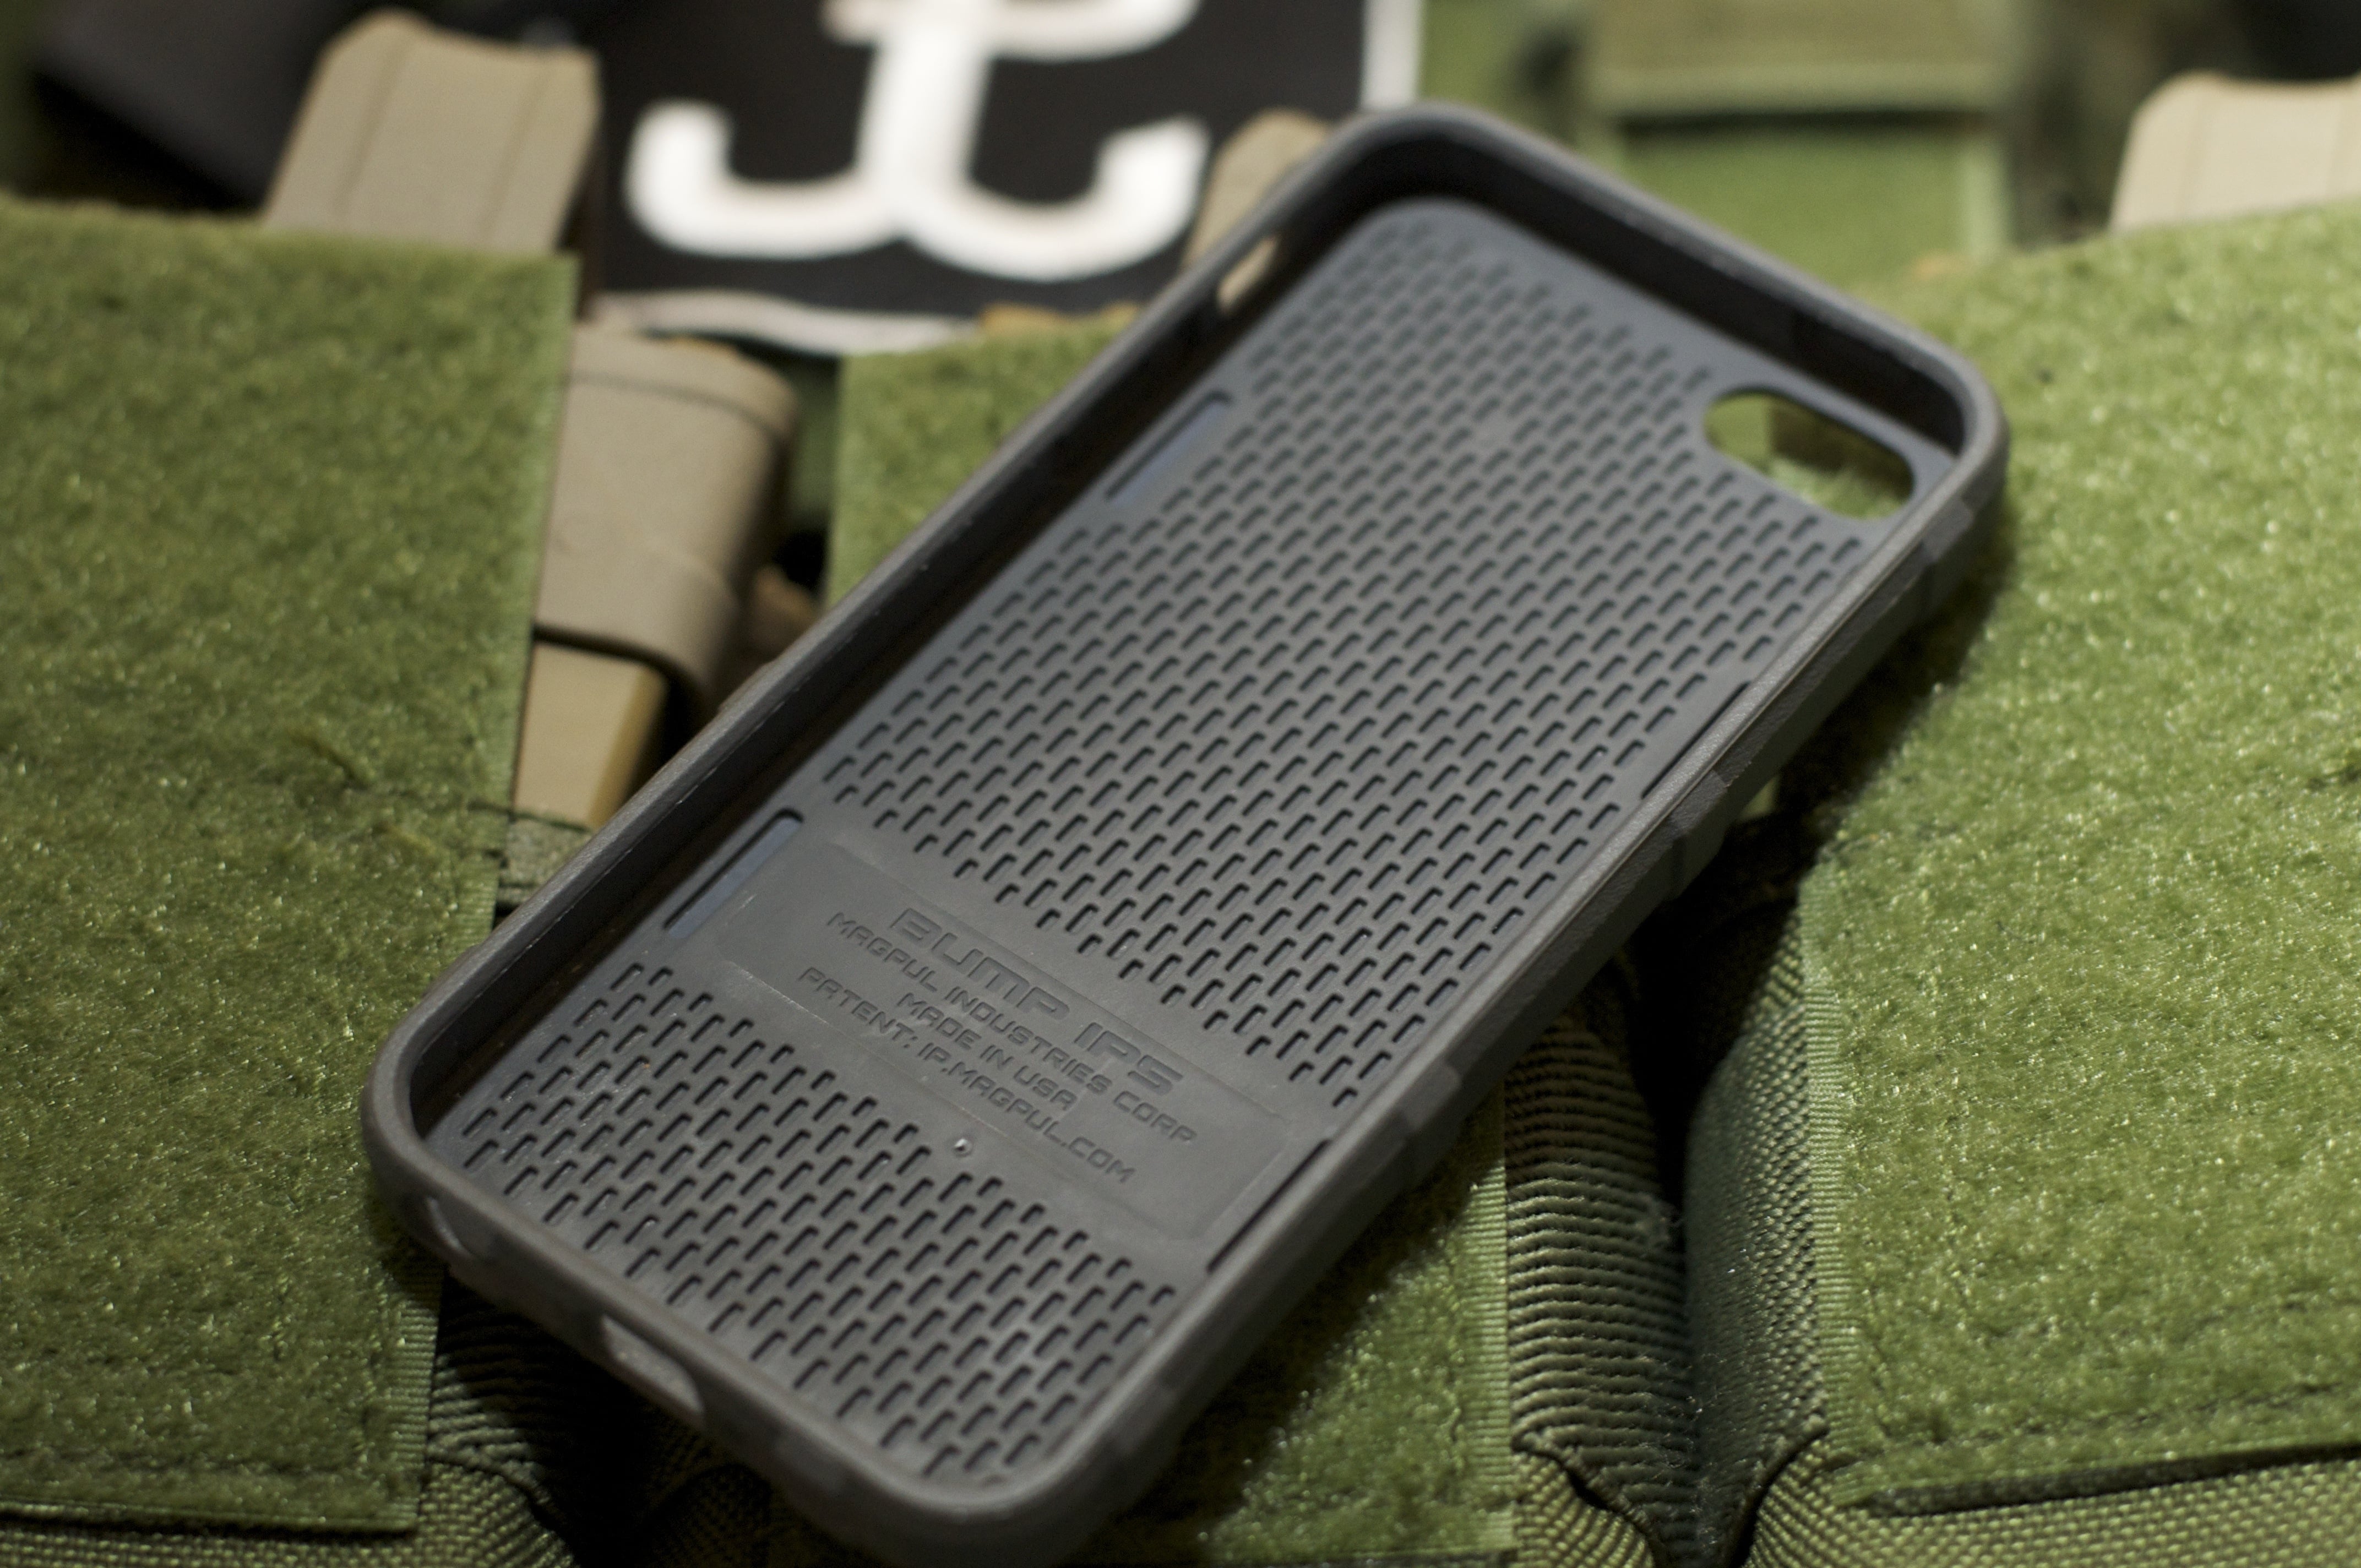 Magpul Bump Case for the new iPhone 5/5s